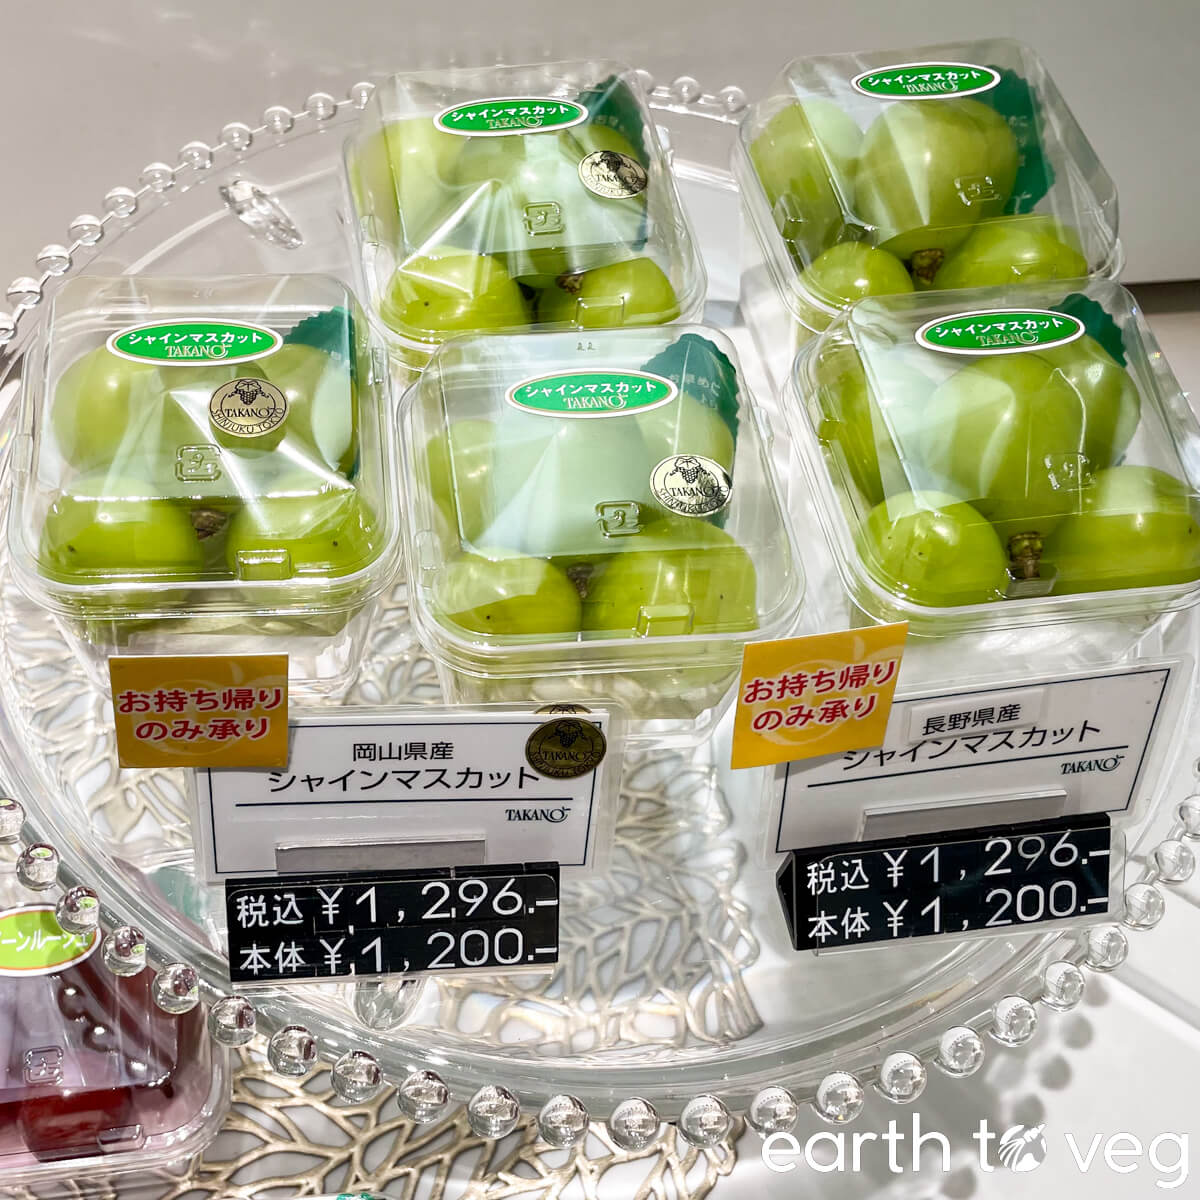 Small boxes of five shine muscat grapes each for sale in Tokyo, Japan.